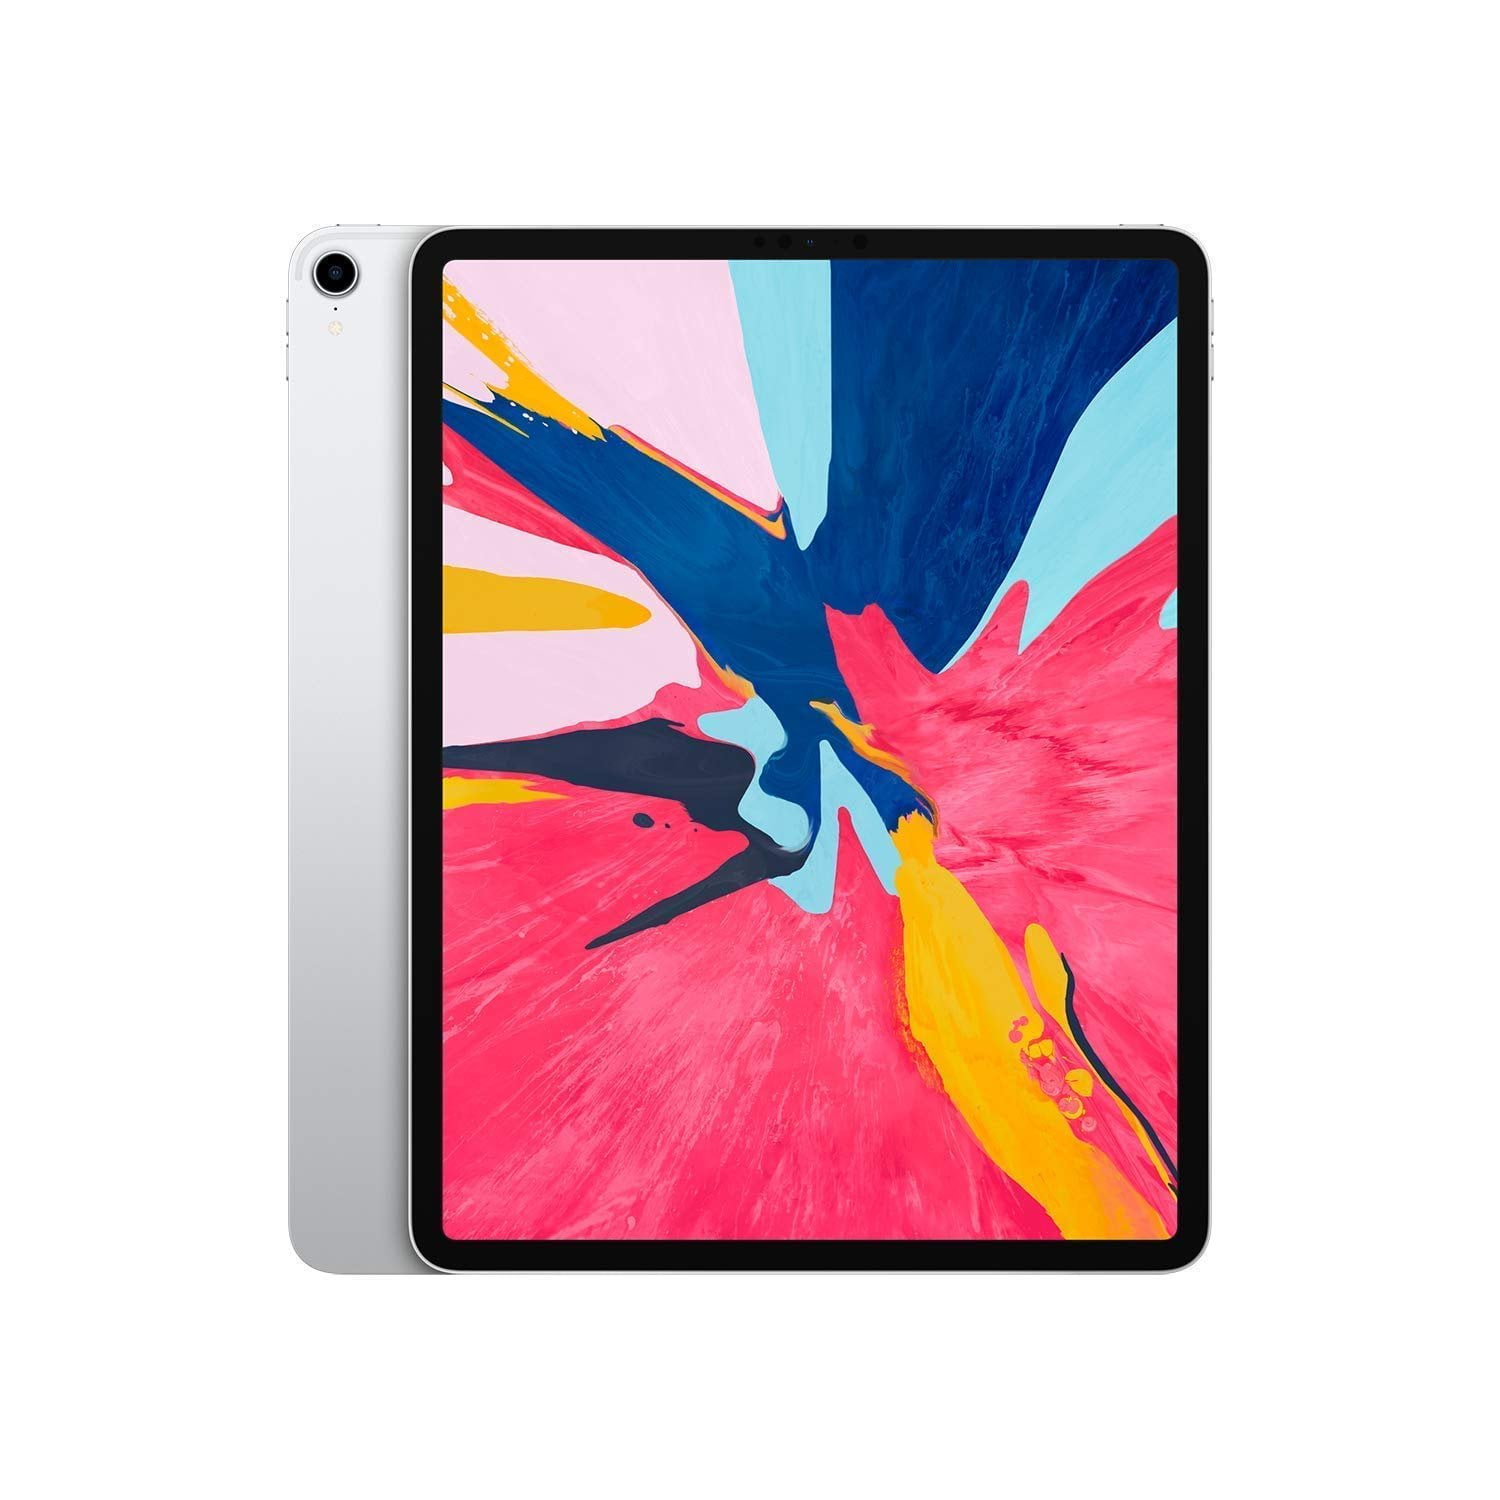 Restored Apple iPad Pro 12.9inch (2nd Gen) 256GB Wi-Fi Only Space Gray  (Refurbished)